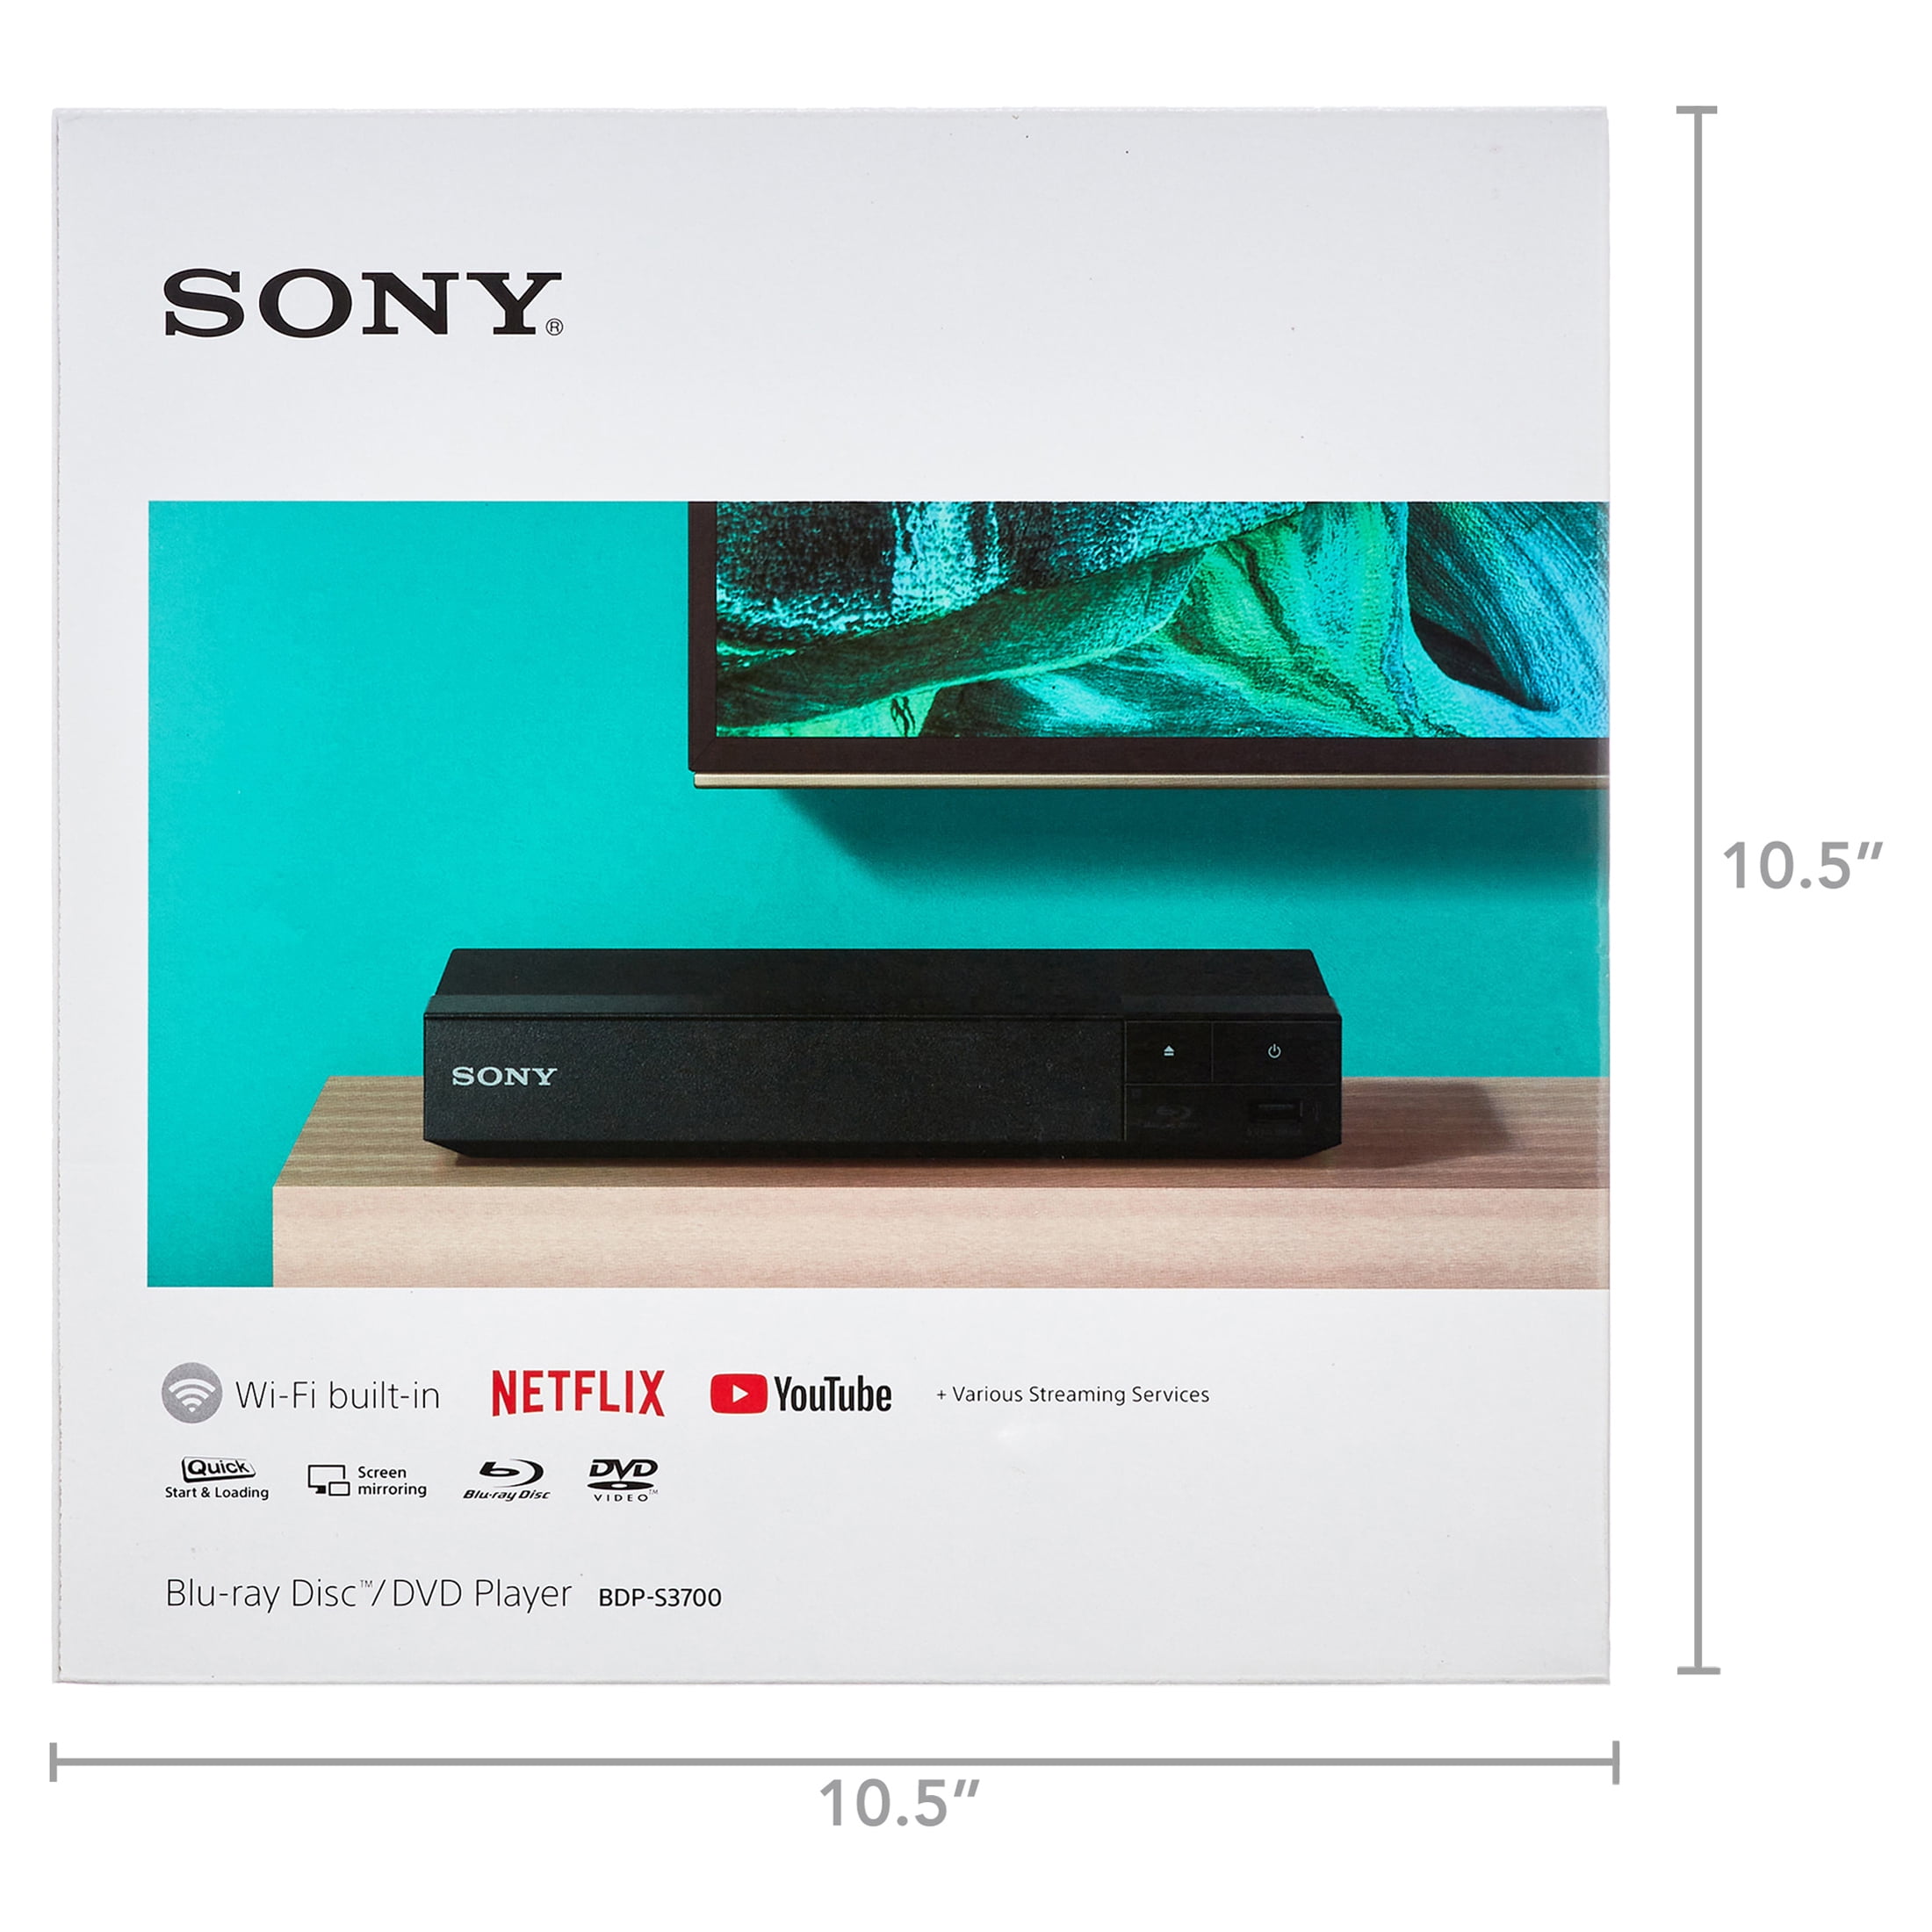 Sony Blu Ray Player with WiFi. Video Streaming & Screen Mirroring, DVD  Players for Tv, HD Bluray Playback, Includes Blue Ray/Cd Player, Full  1080p